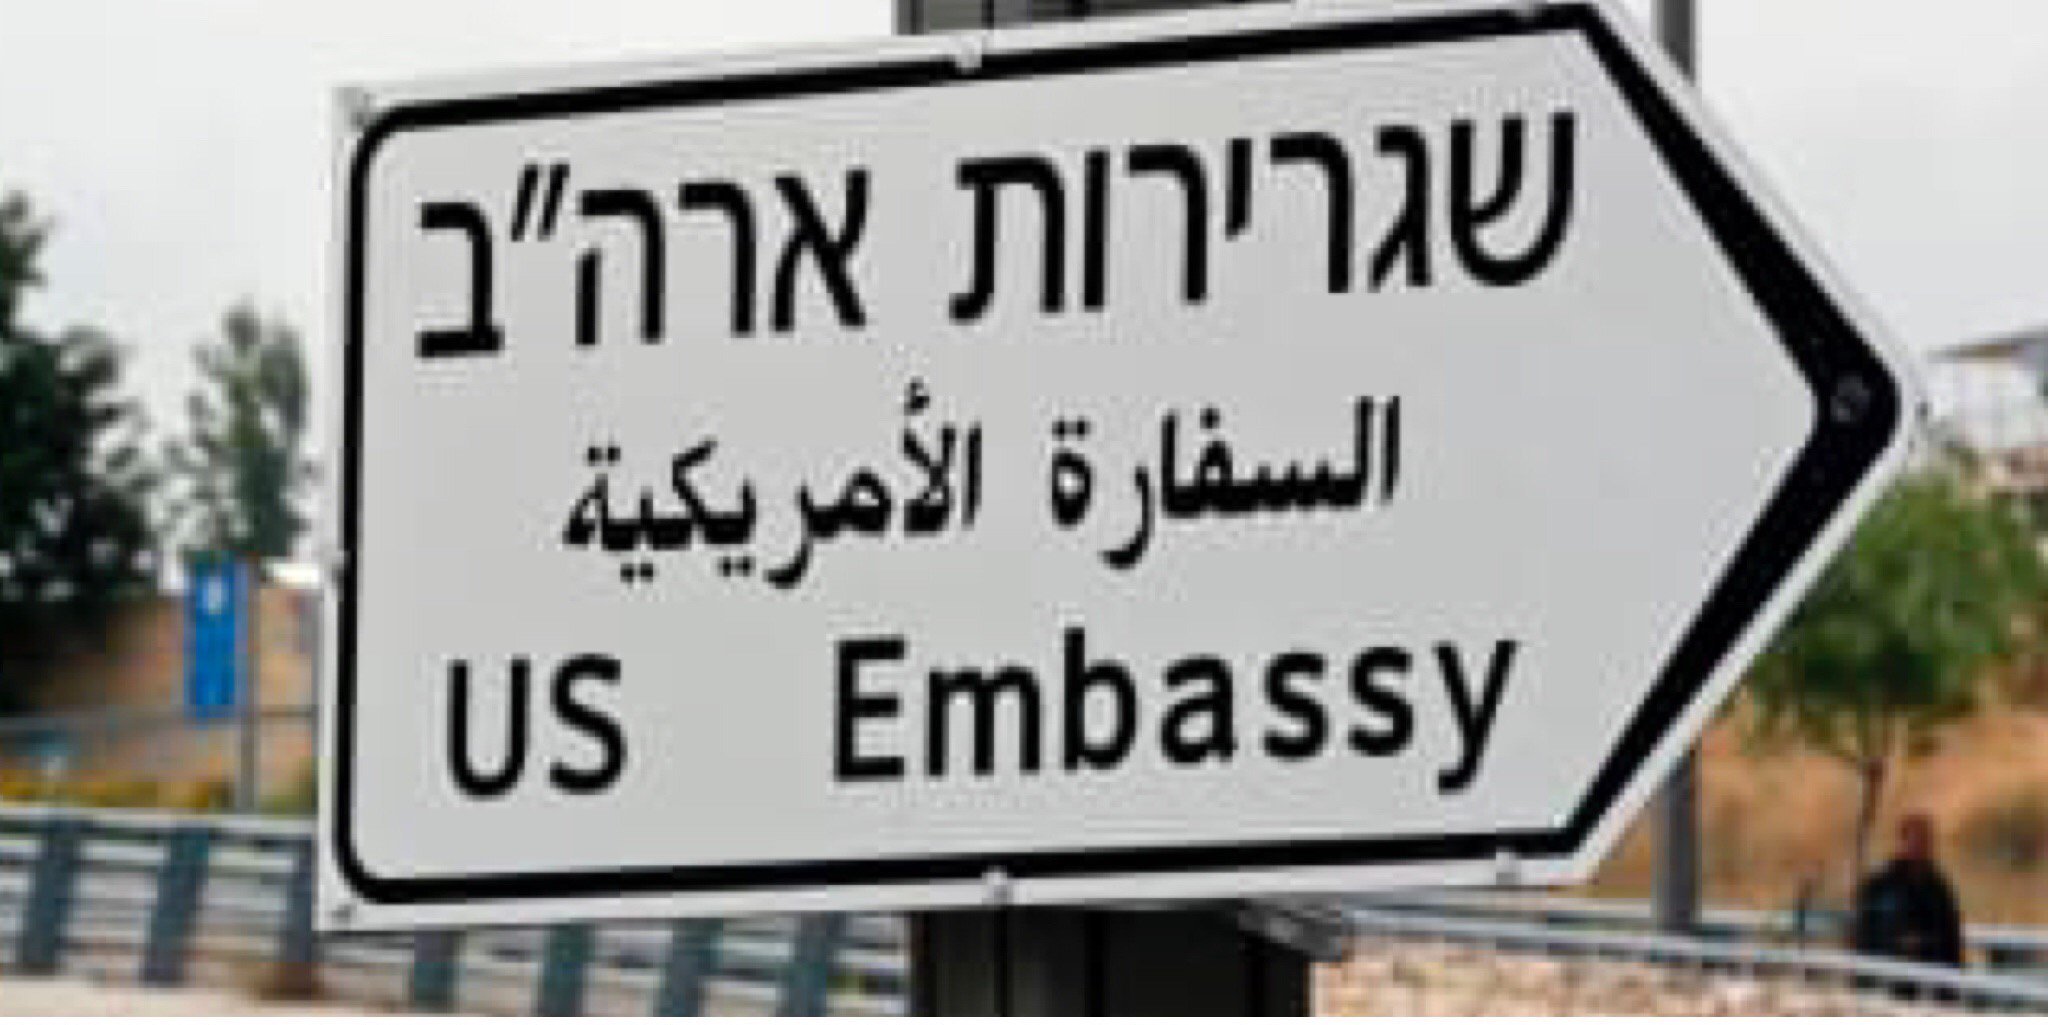 Embassy points way to peace, truth and justice